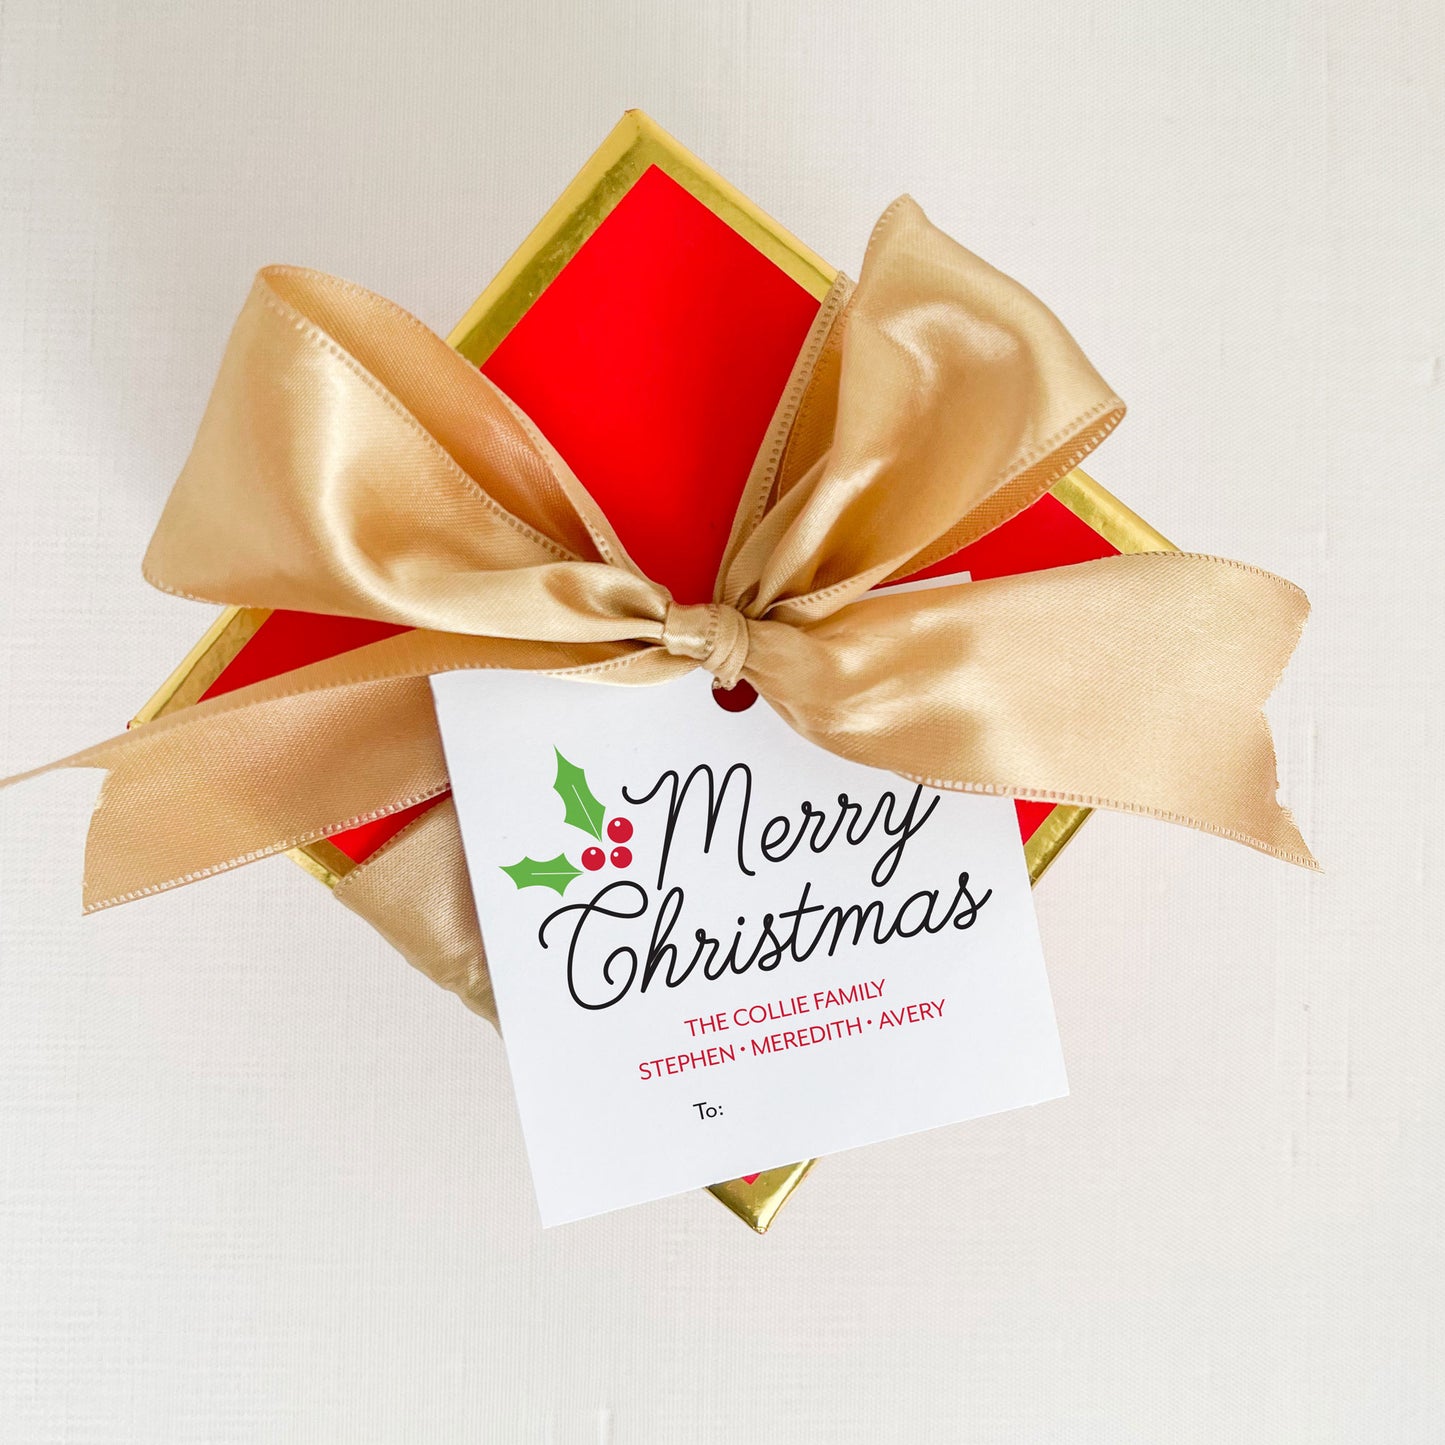 Elegant script Merry Christmas, personalized holiday gift tags, square, holly leaves with red berries